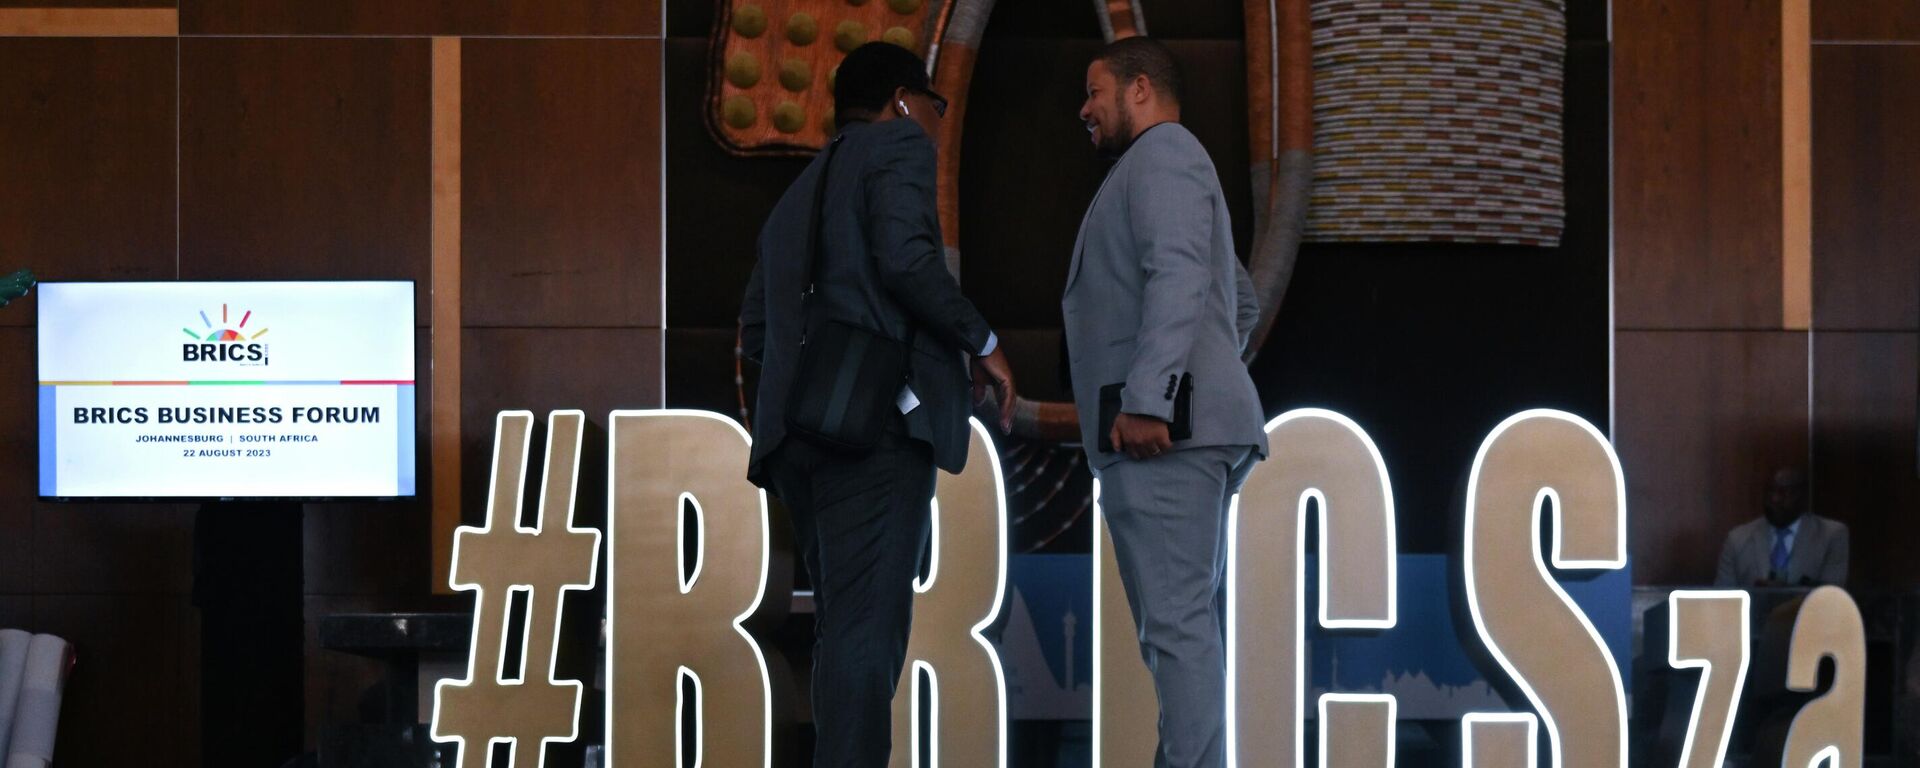 Men stand next to an installation with the logo of BRICS during the 15th BRICS Summit in Johannesburg, South Africa, on Tuesday, August 22, 2023. - Sputnik Africa, 1920, 22.08.2023